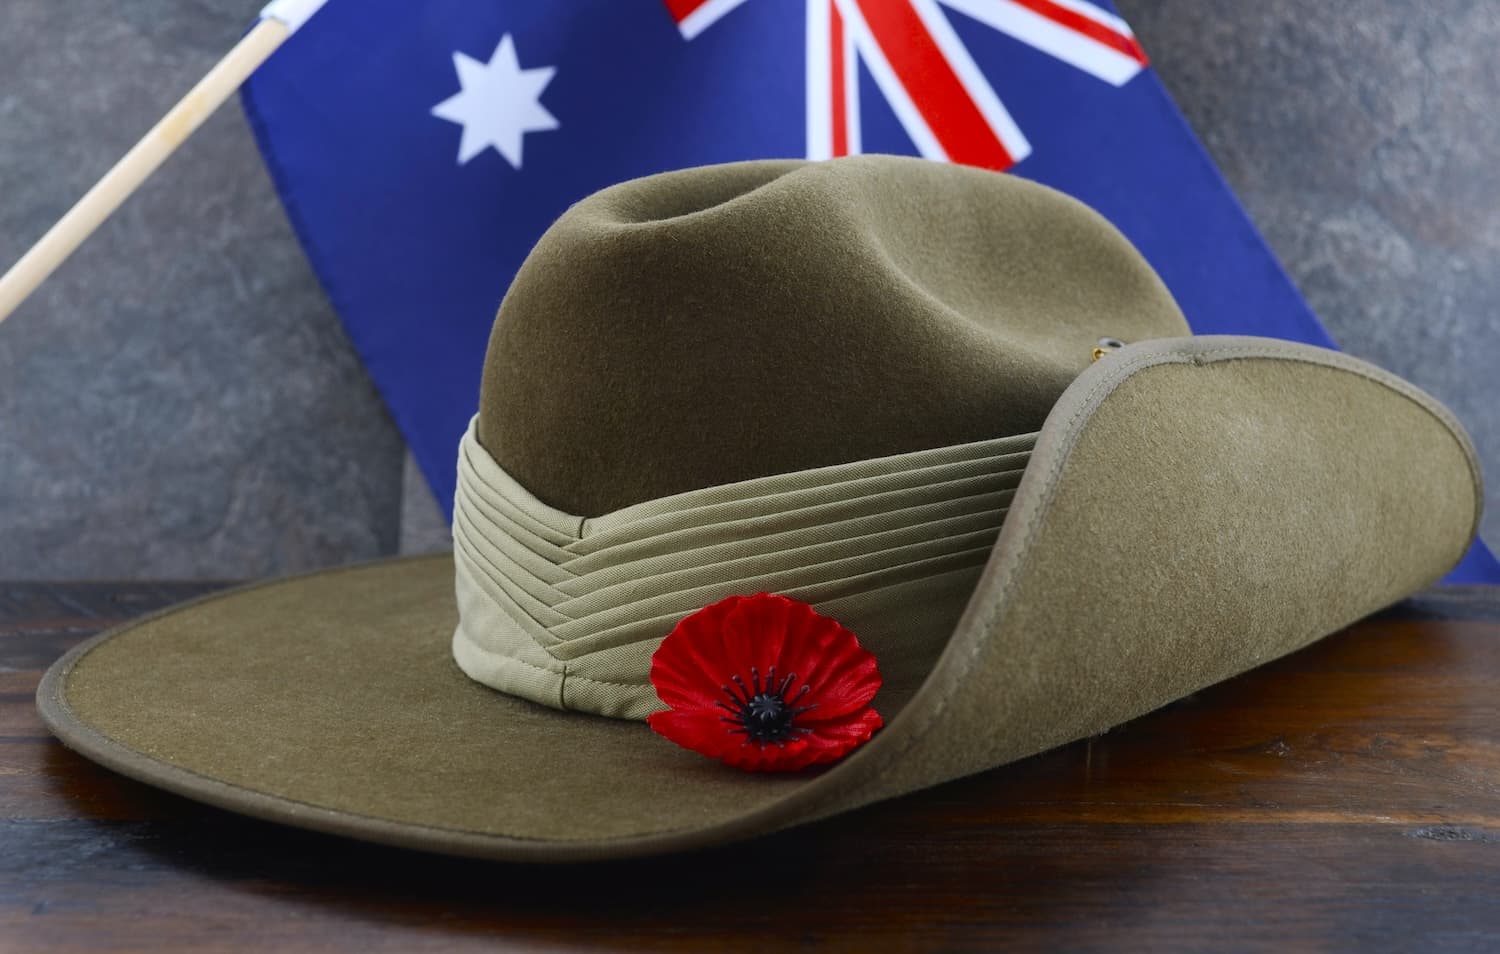 brett wild claims veteran memorial service blocked by minister featured image